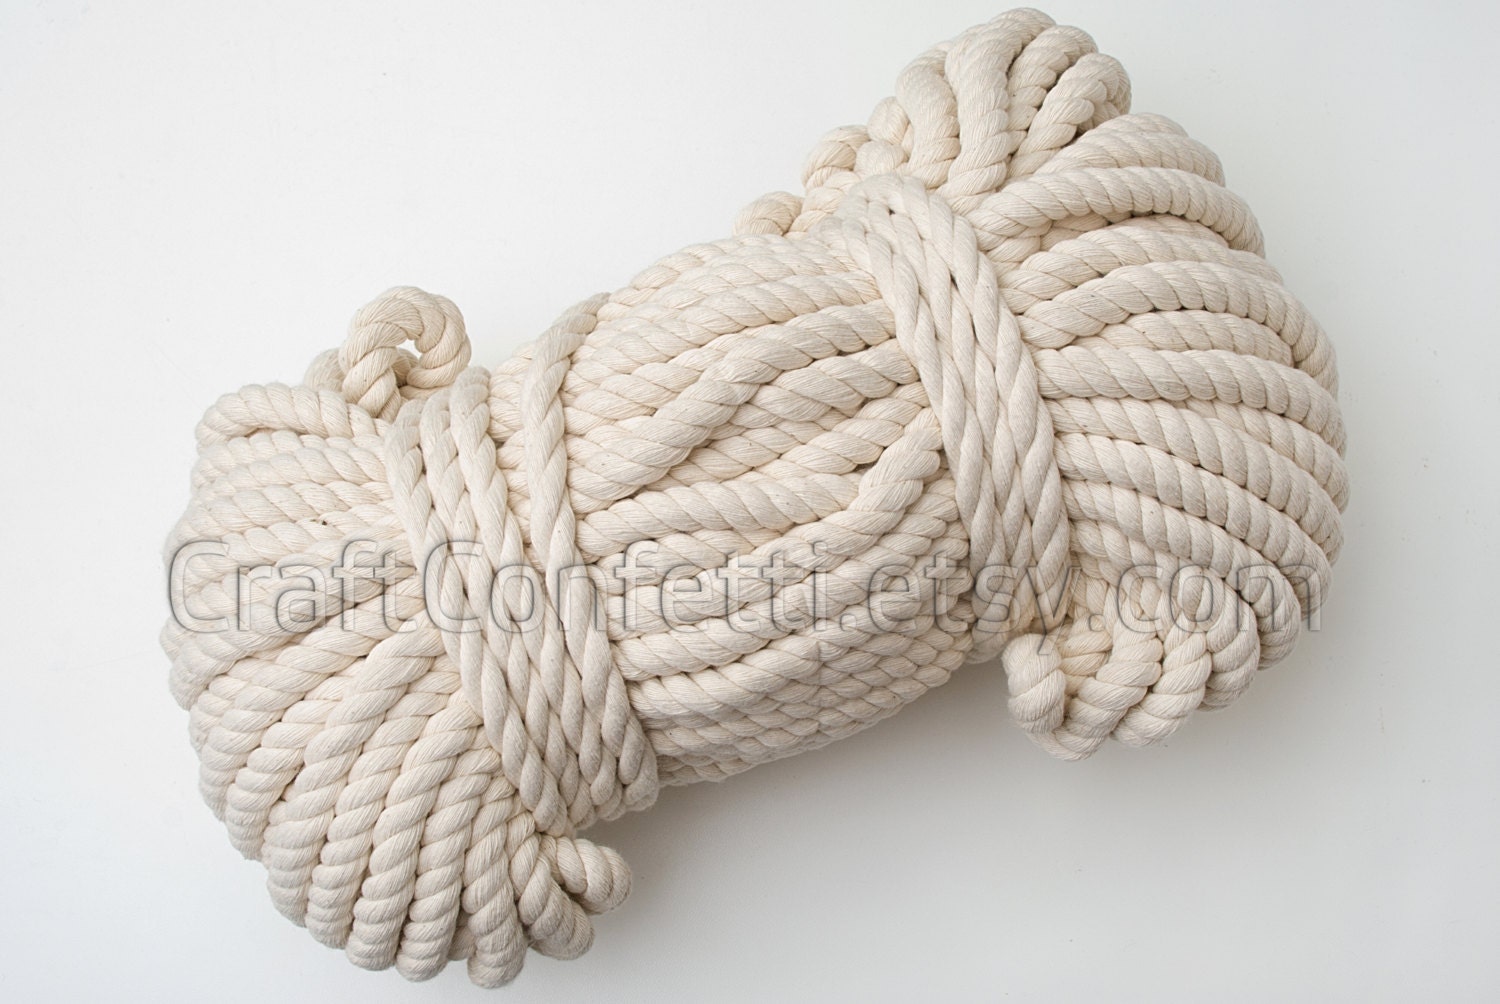 SINYLOO Natural Twisted Thick Cotton Rope - Brown Nautical Rope for Crafts  Sw